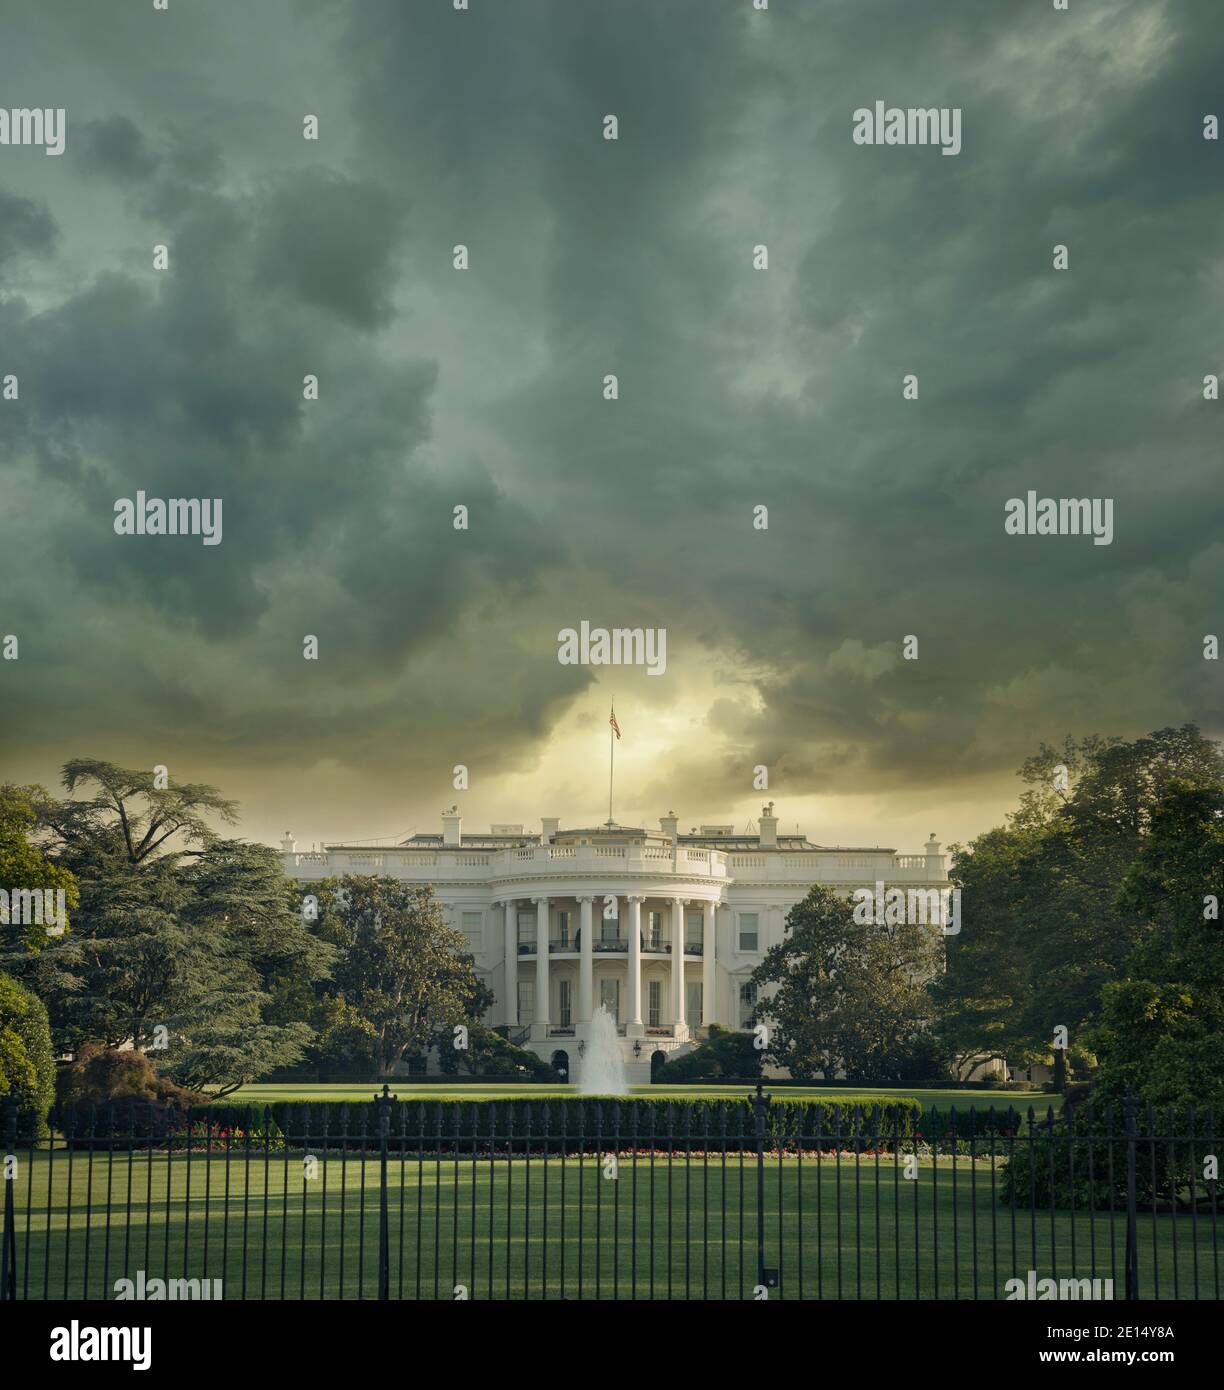 The White House in Washington DC under dark stormy clouds Stock Photo